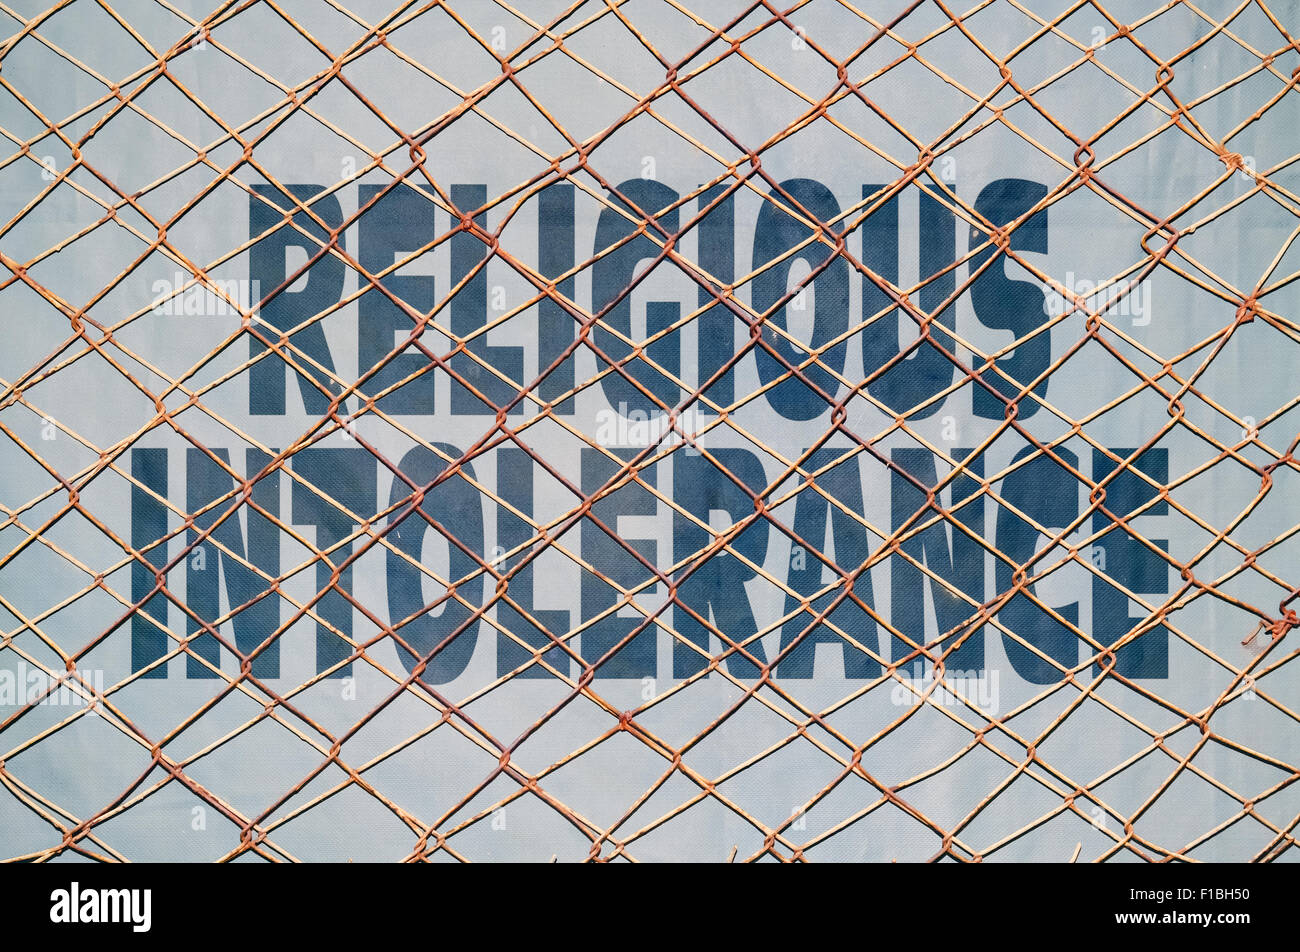 Conceptual appeal for stopping the religious intolerance and violence Stock Photo